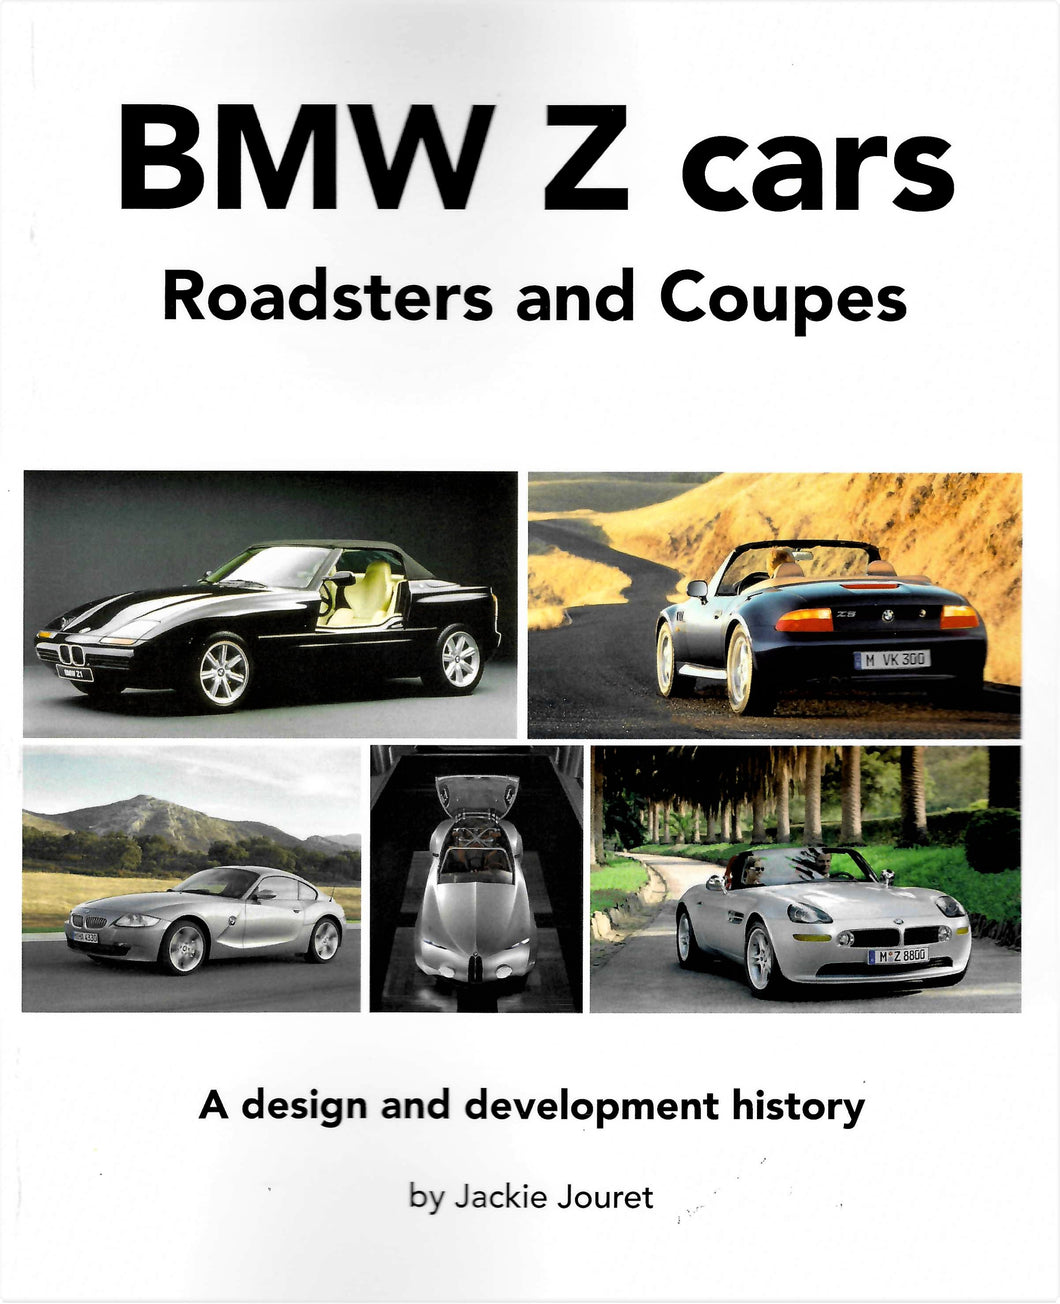 BMW Z cars Roadsters and Coupes by Jackie Jouret